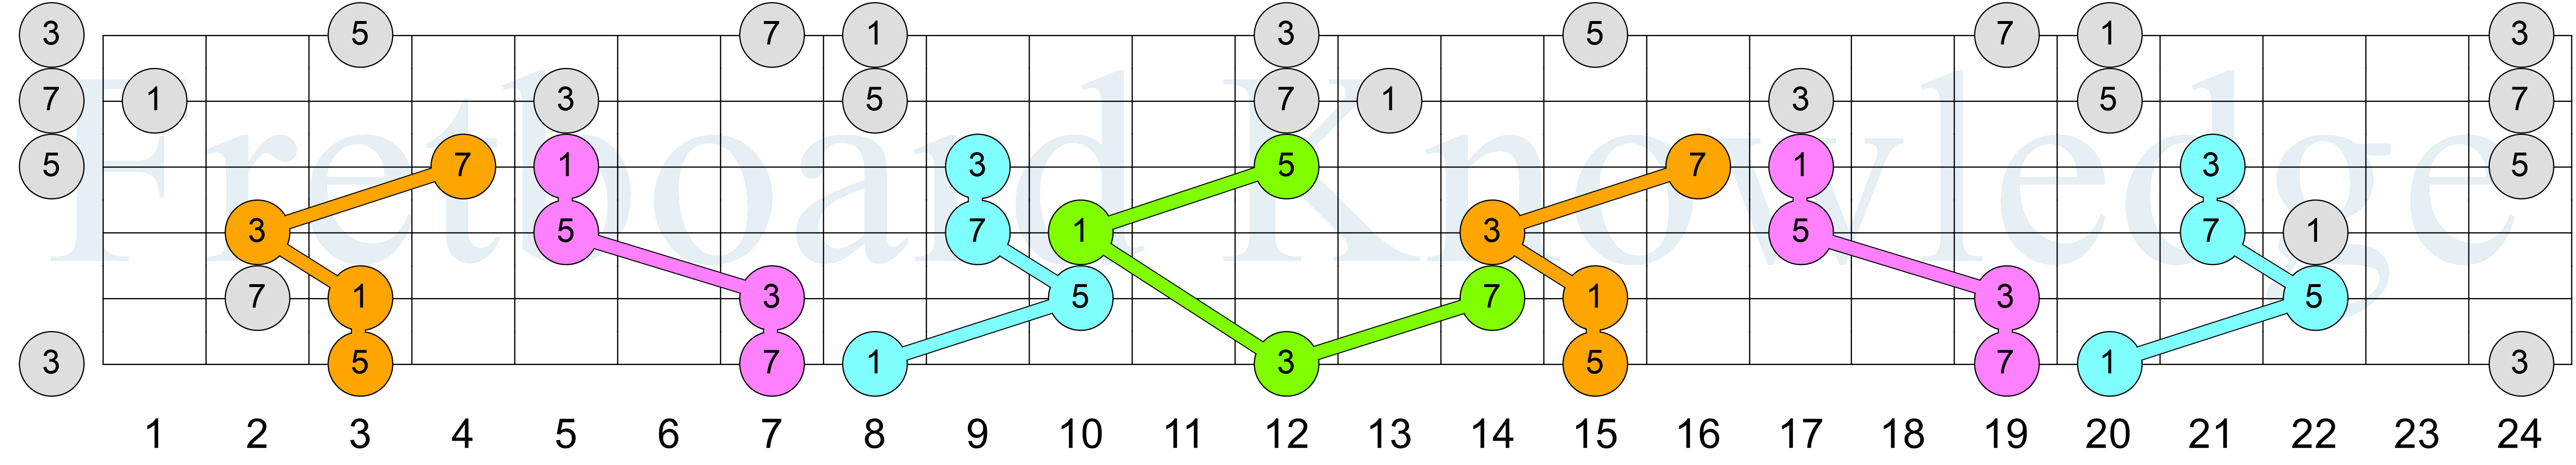 Cmaj7 - Drop 2 - Strings 3456 - Colored Connected